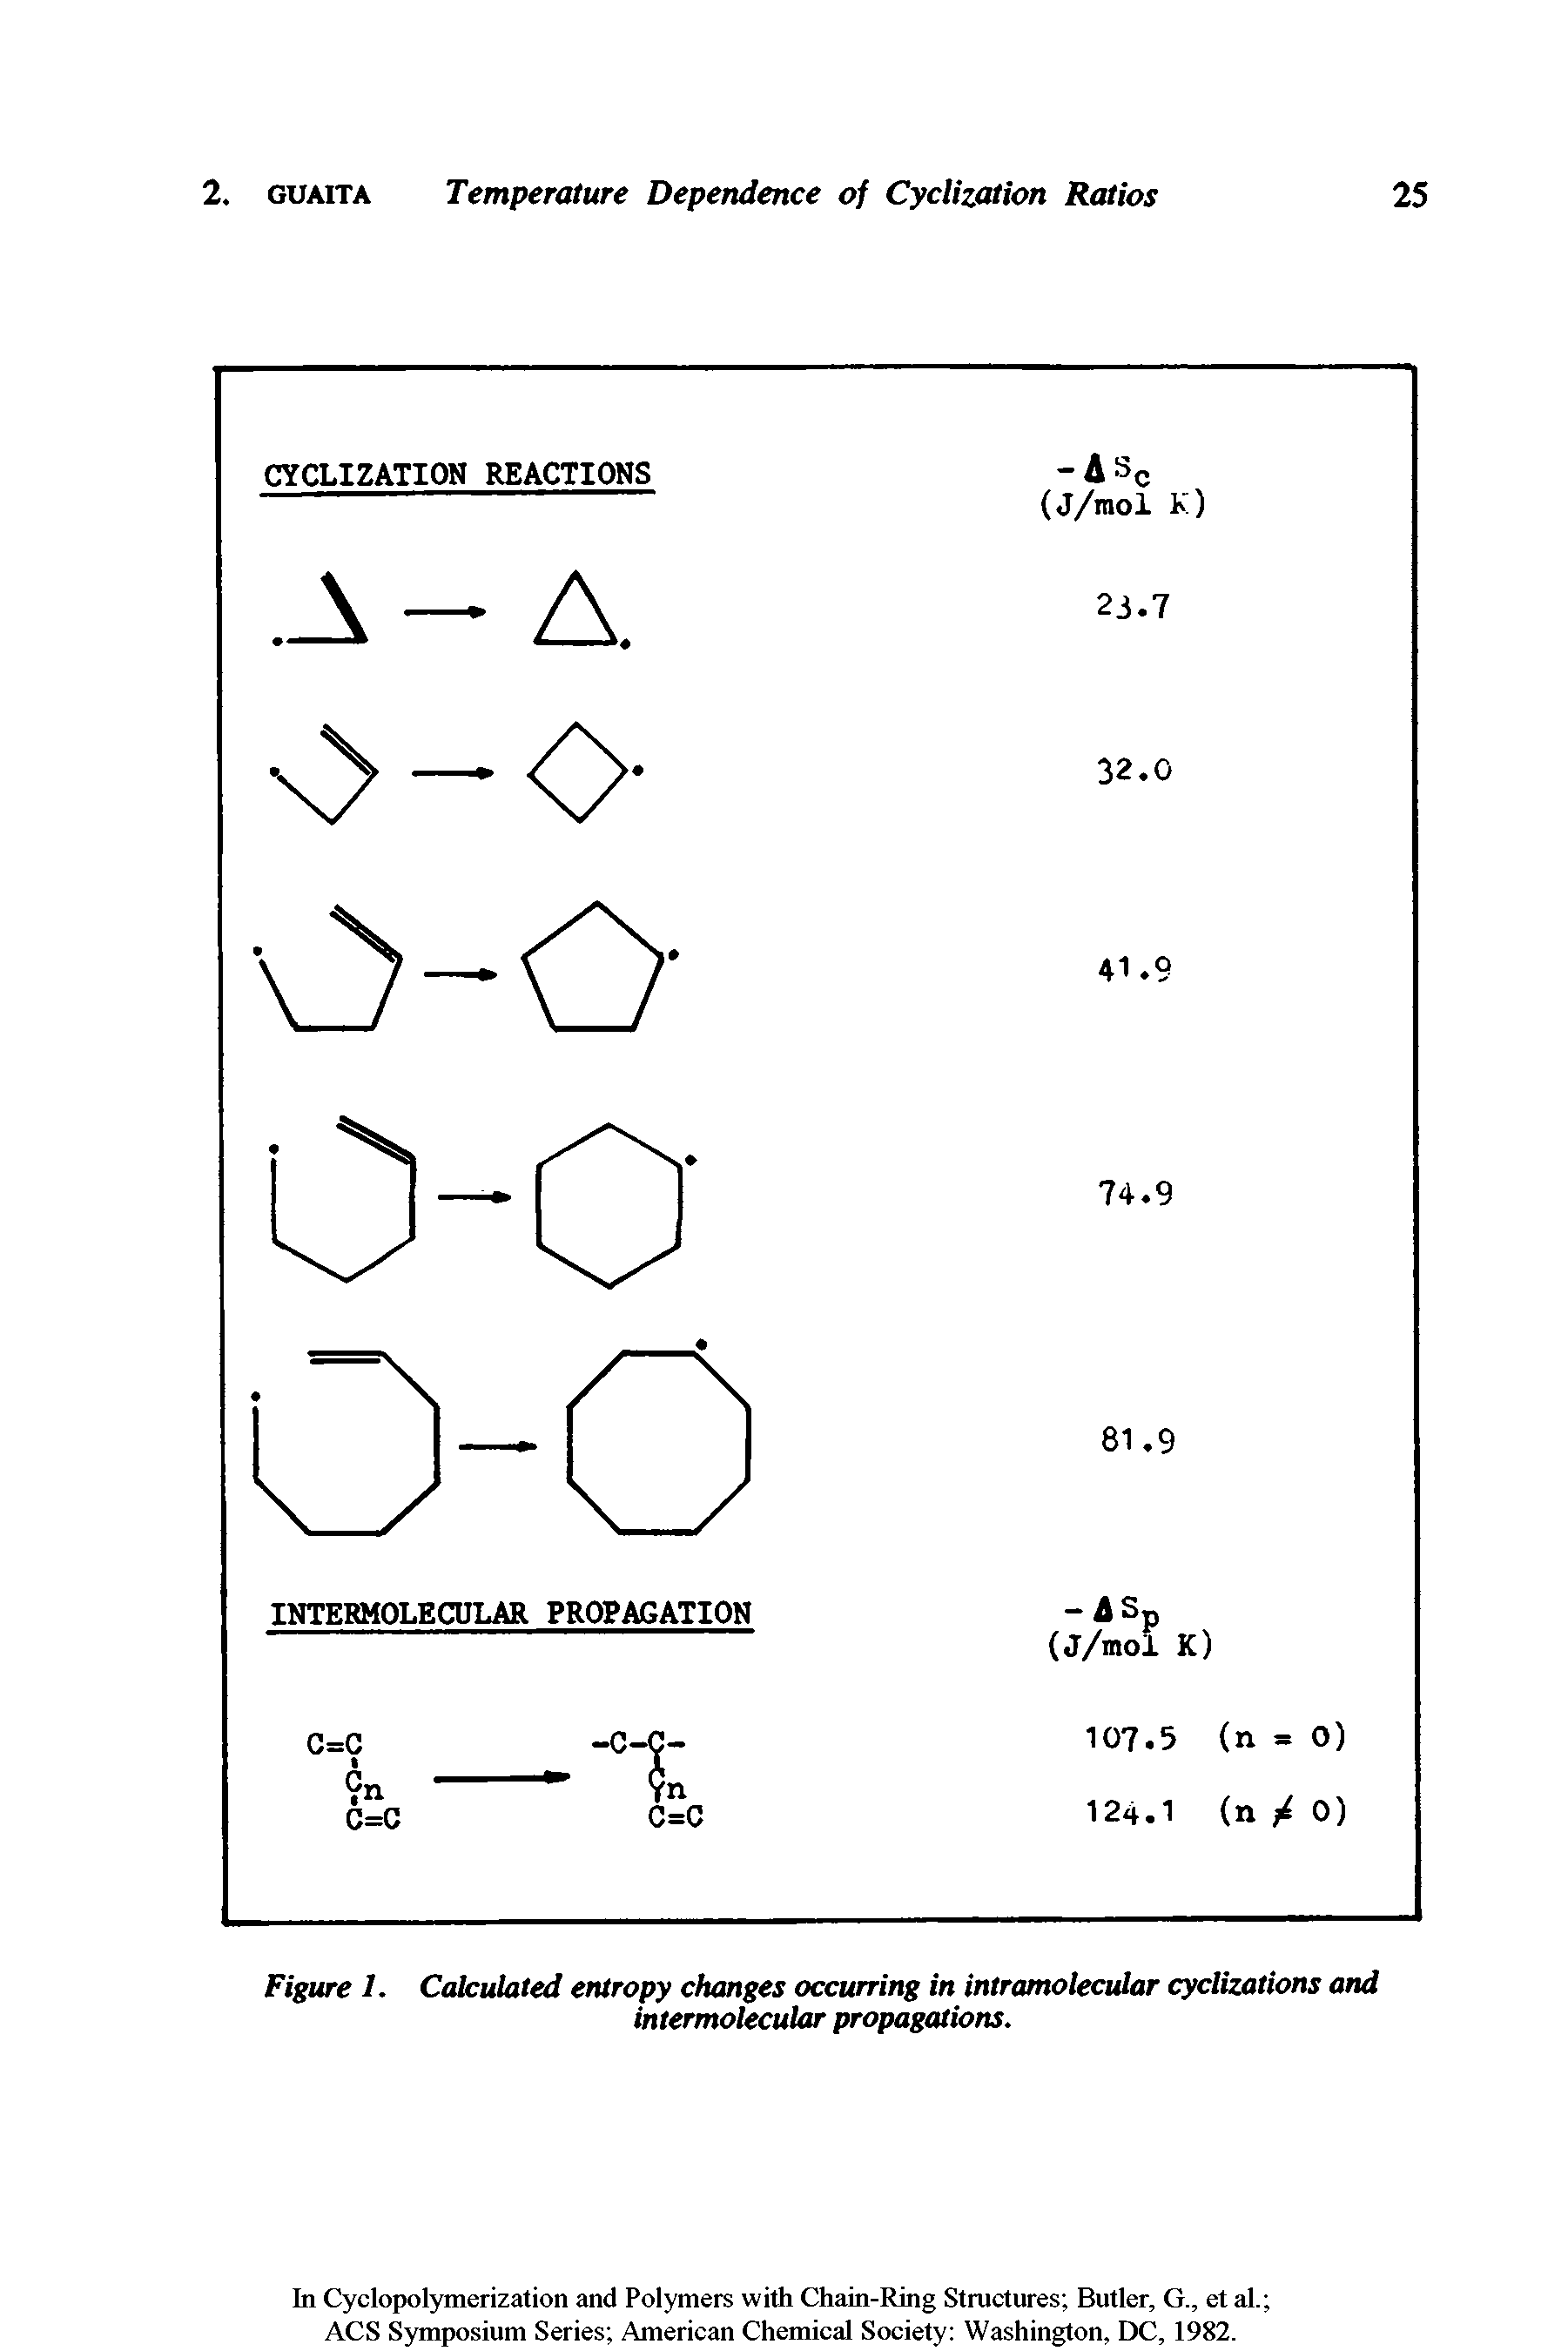 Figure 1. Calculated entropy changes occurring in intramolecular cyclizations and intermolecular propagations.